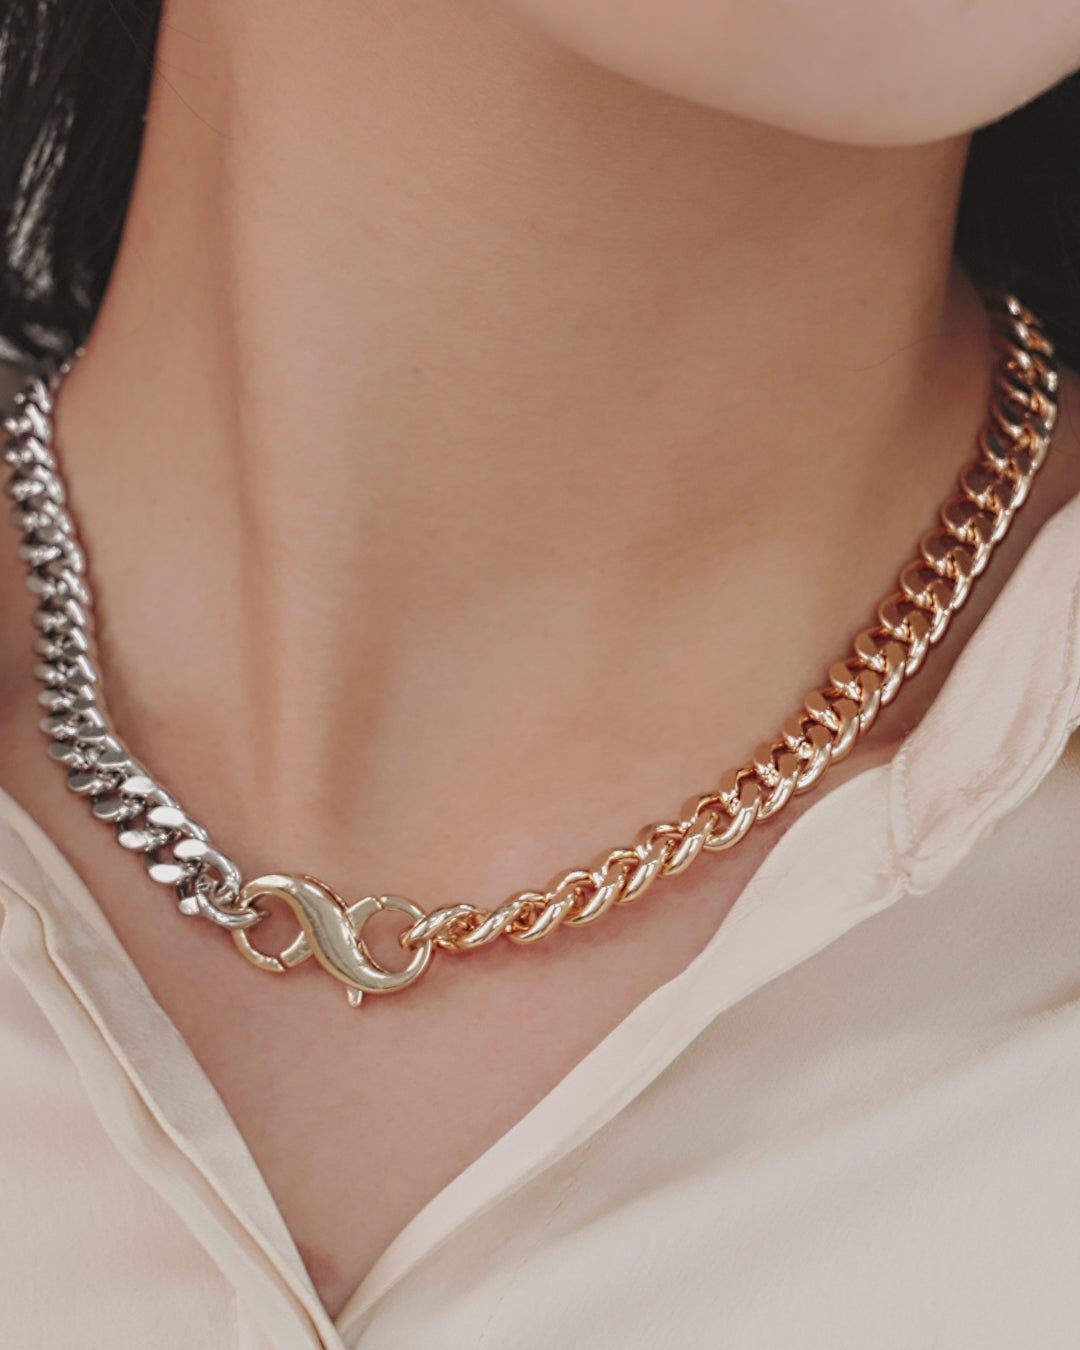 Mixed Metal Chain Link Necklace on model in video